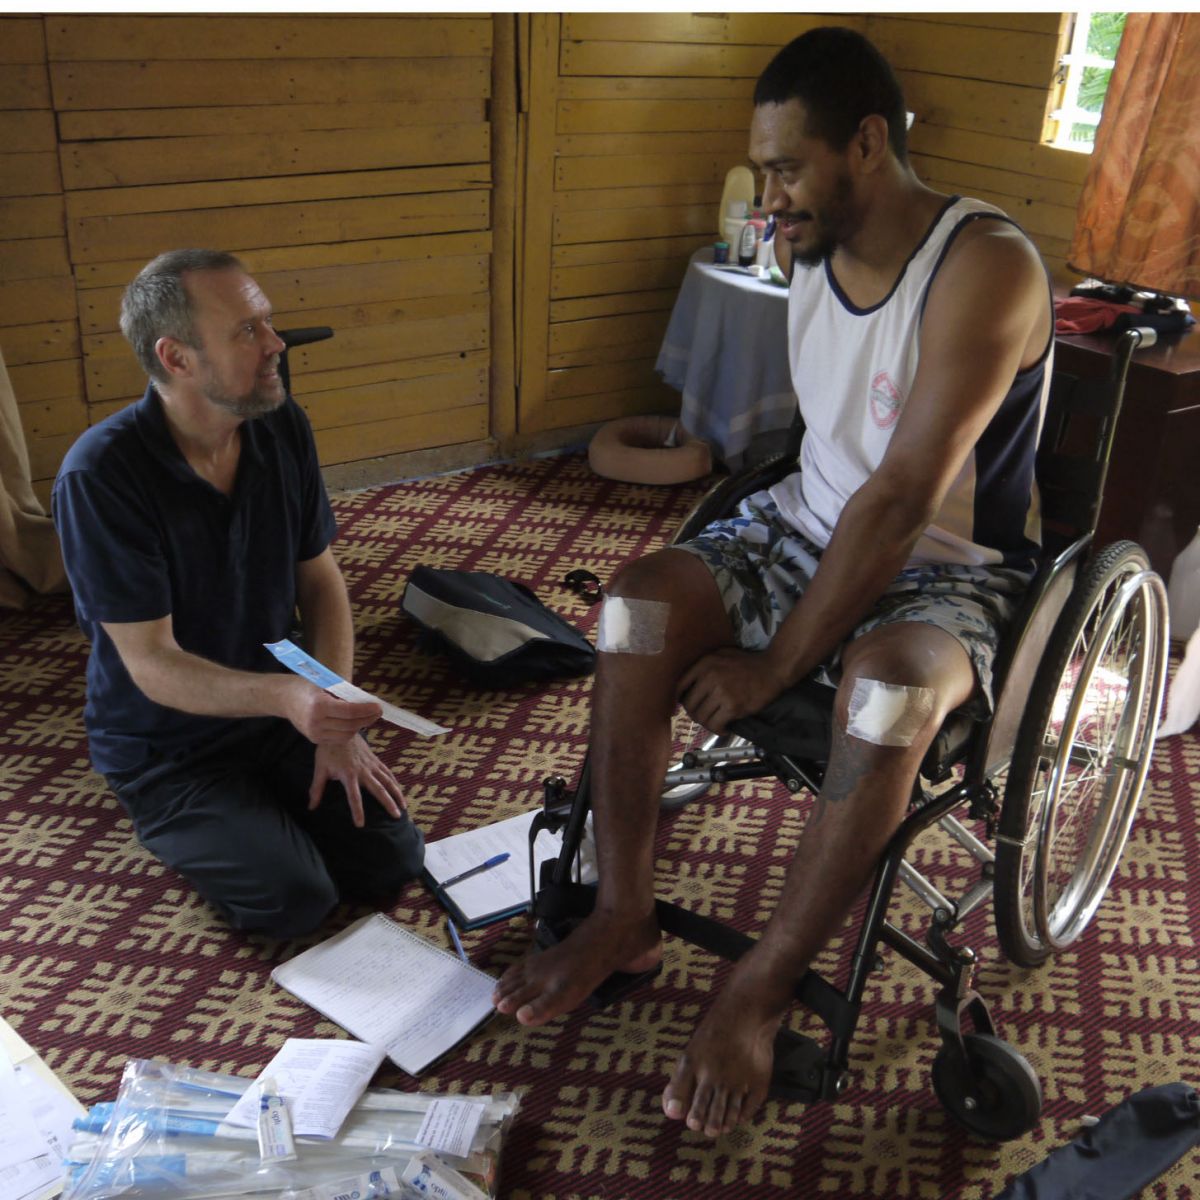 Motivation Australia staff present wheelchair user with Paralogic products in Fiji